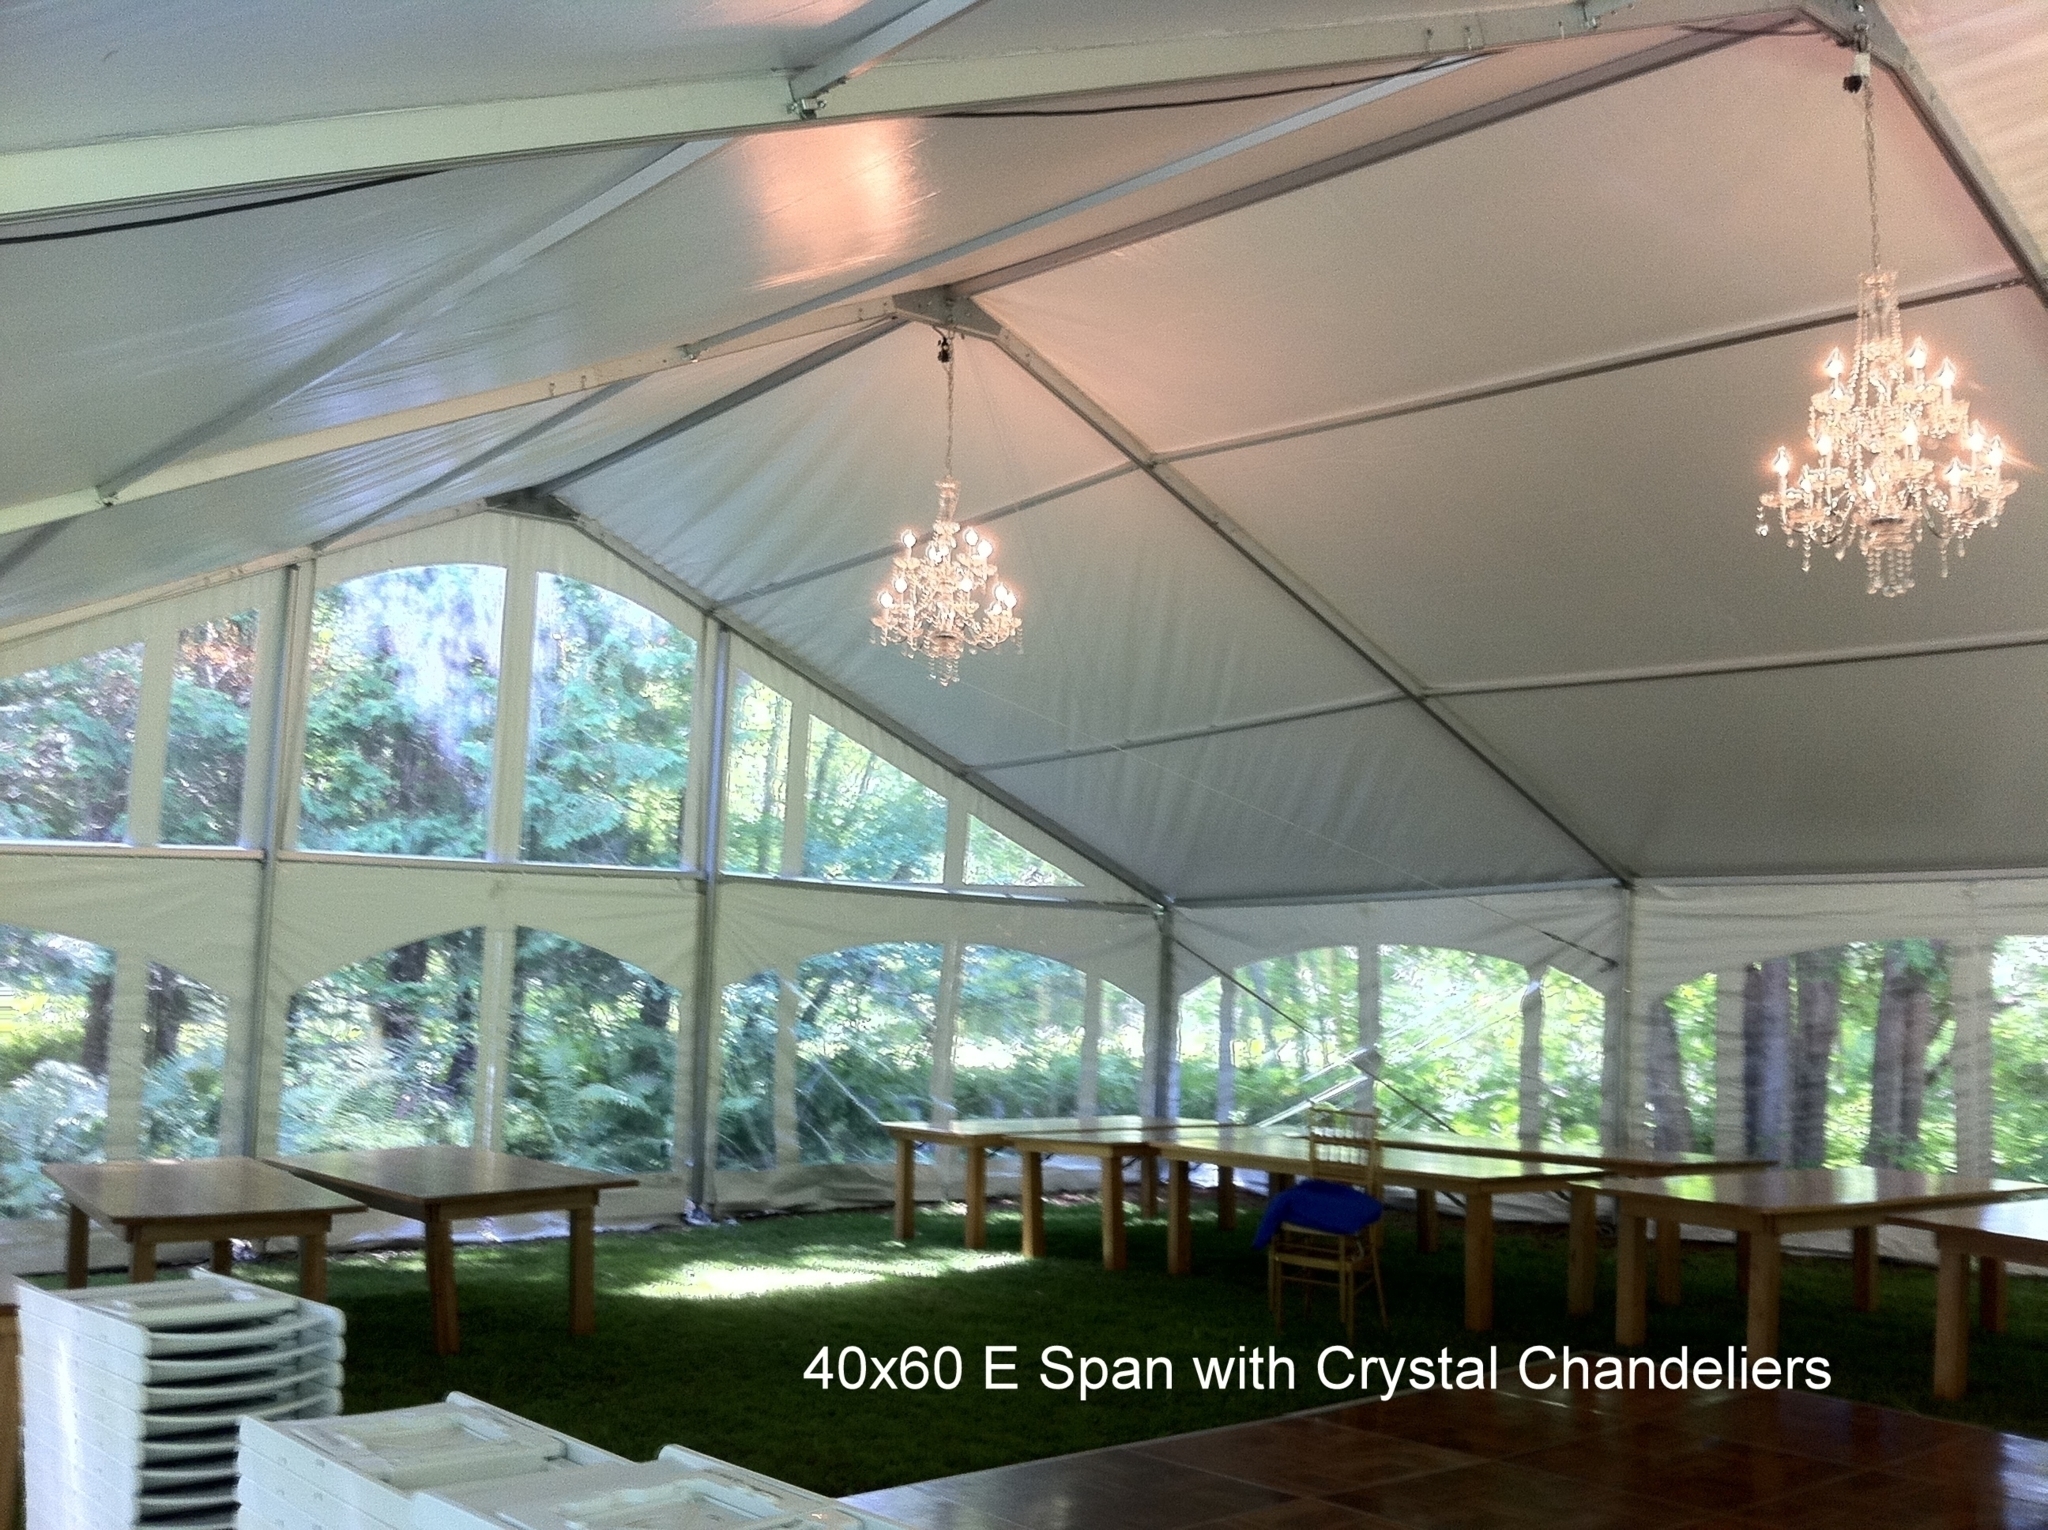 Totally Covered Event Rentals - Tent Rental